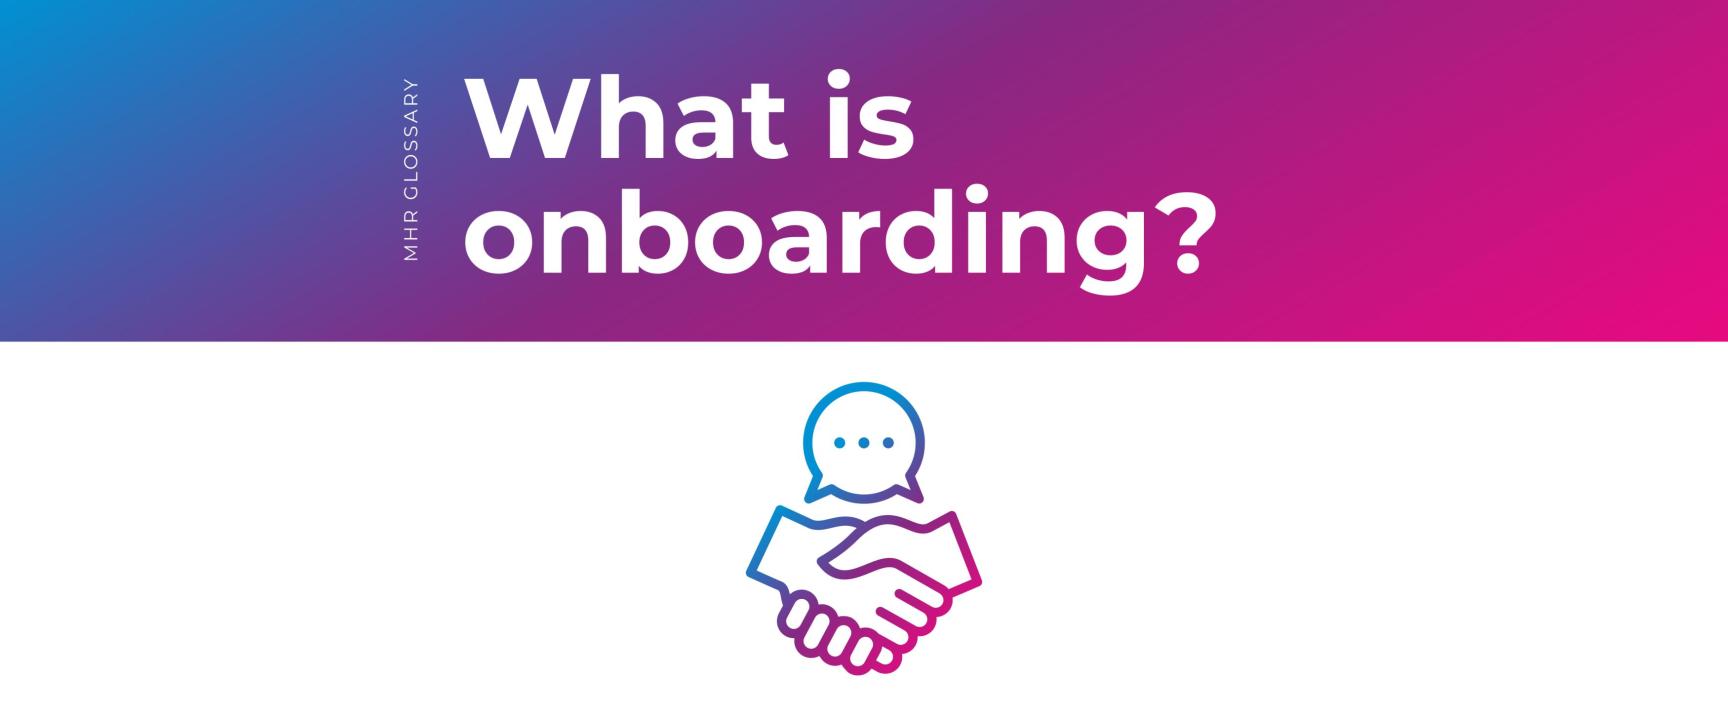 what is onboarding? with an handshake icon with a speech bubble.